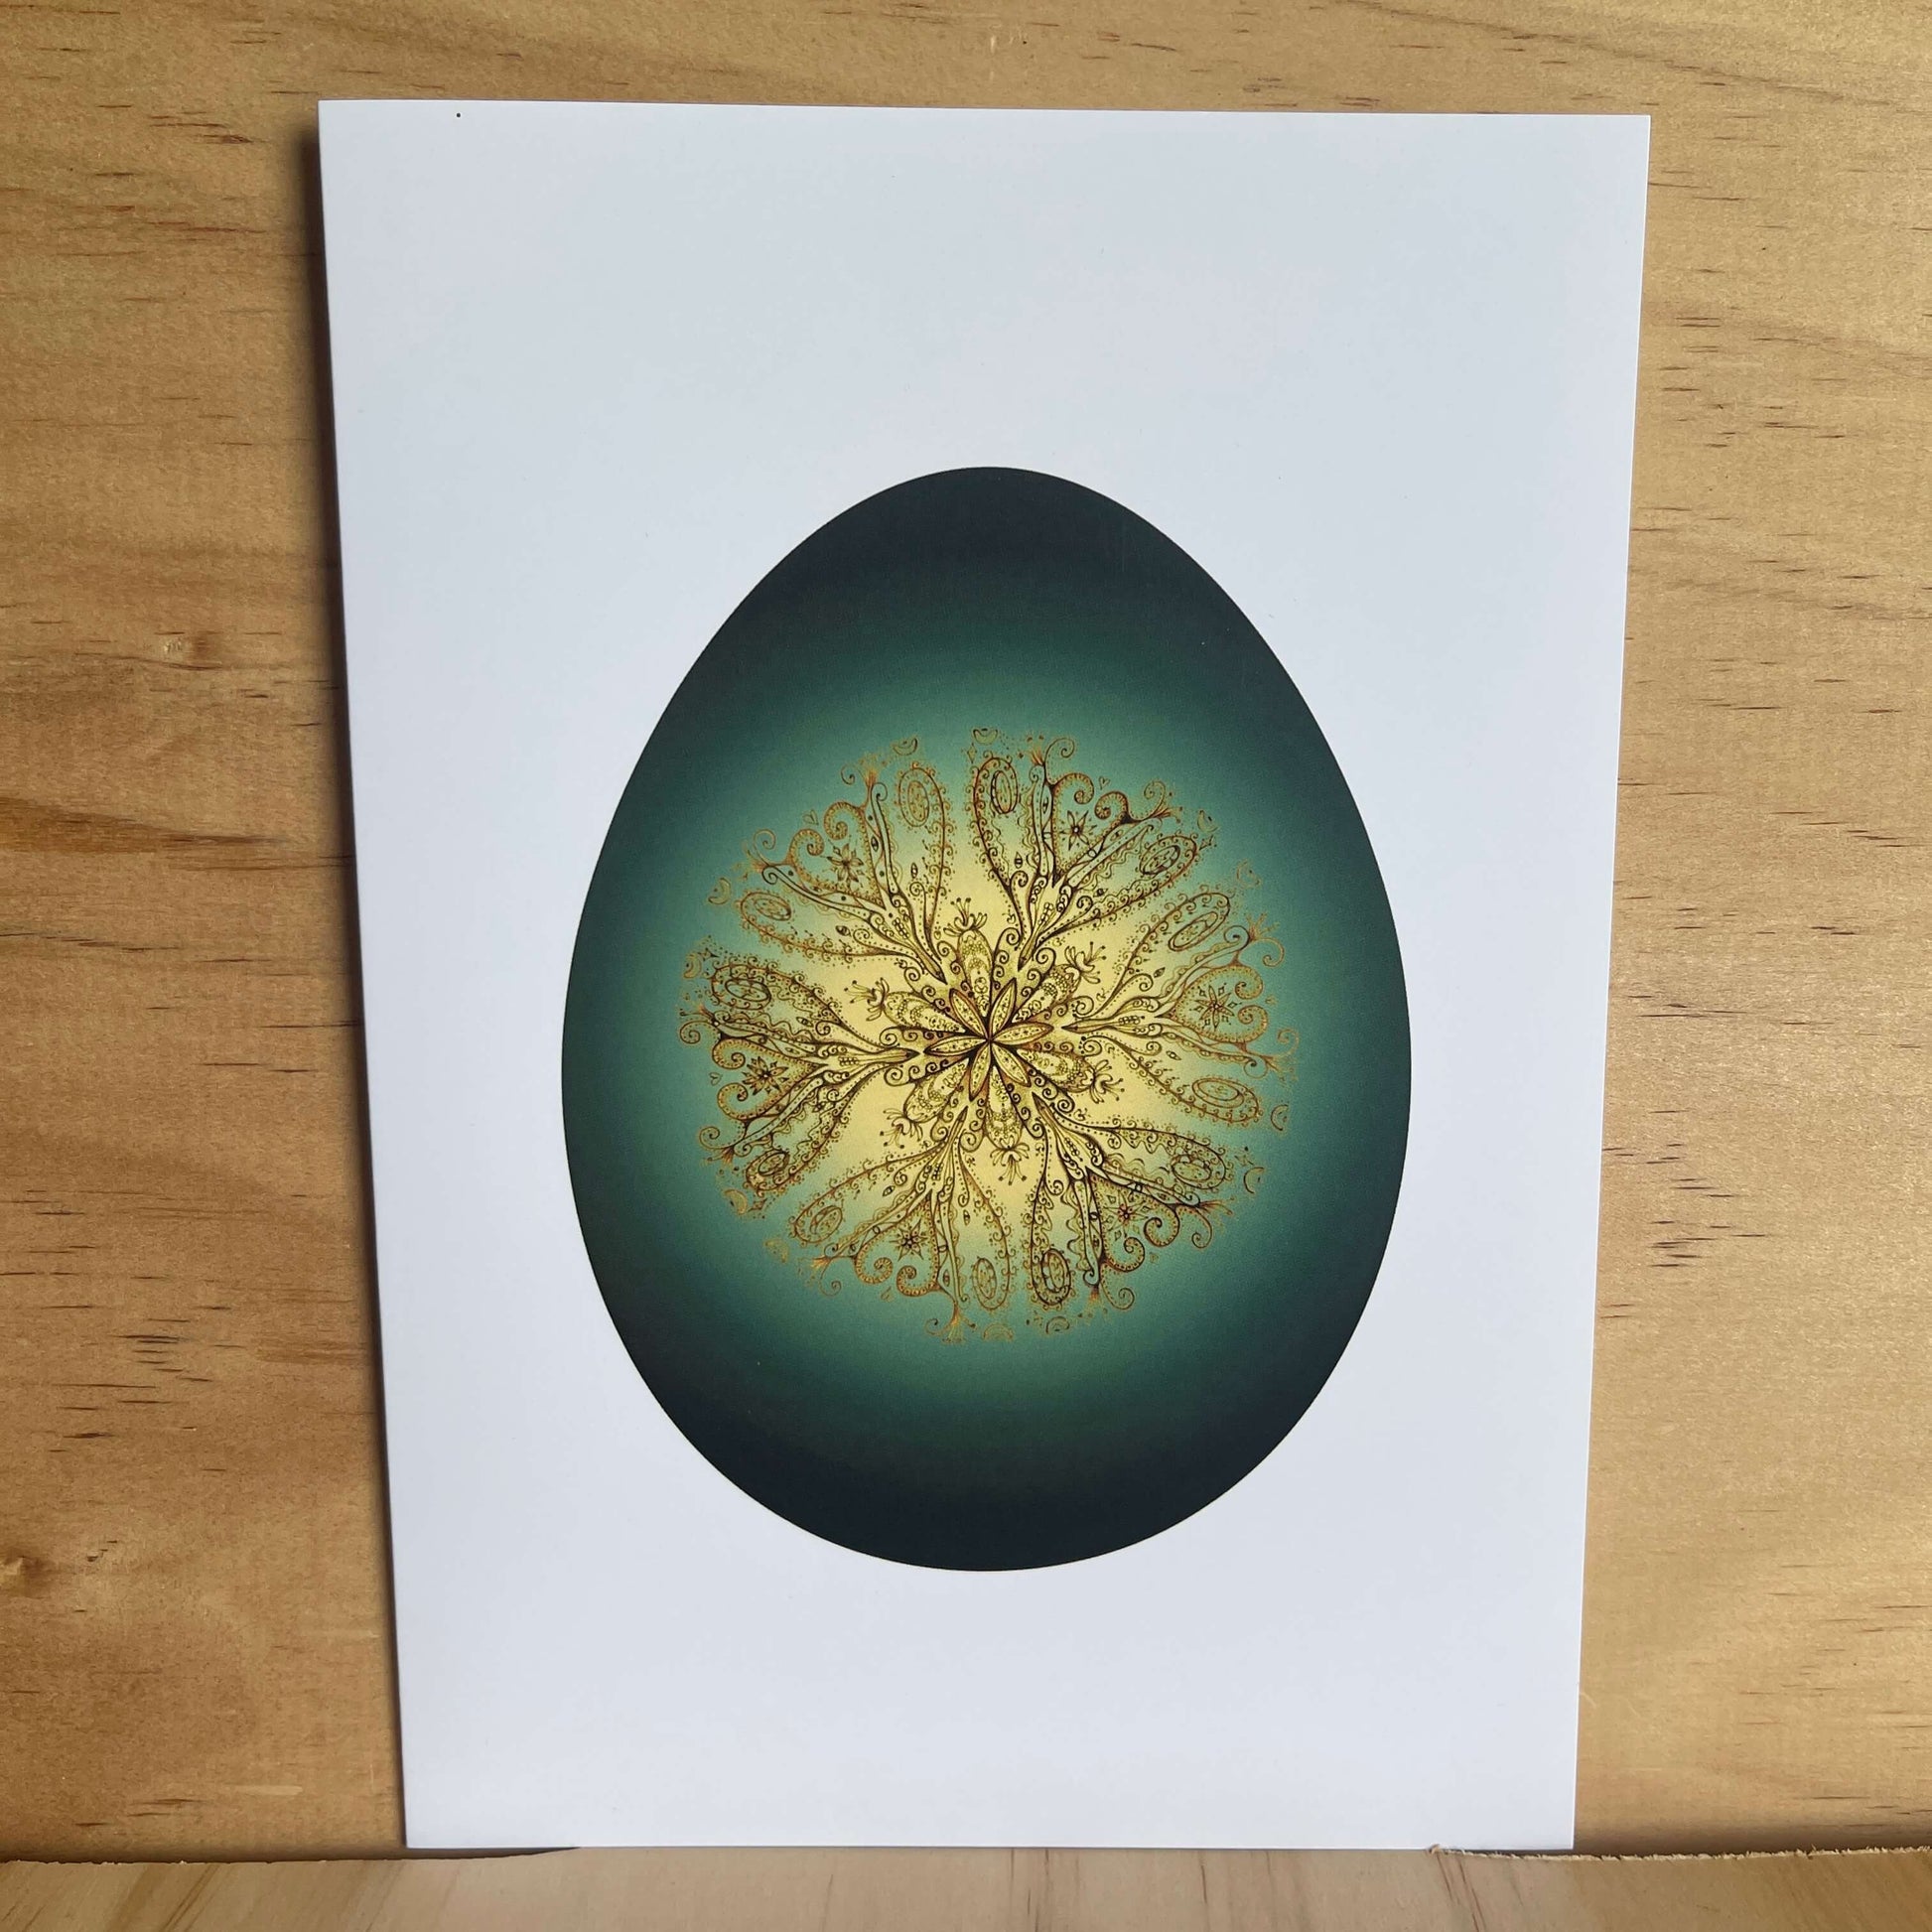 Greeting card with greenstone themed egg and gold vine pattern inside egg. 